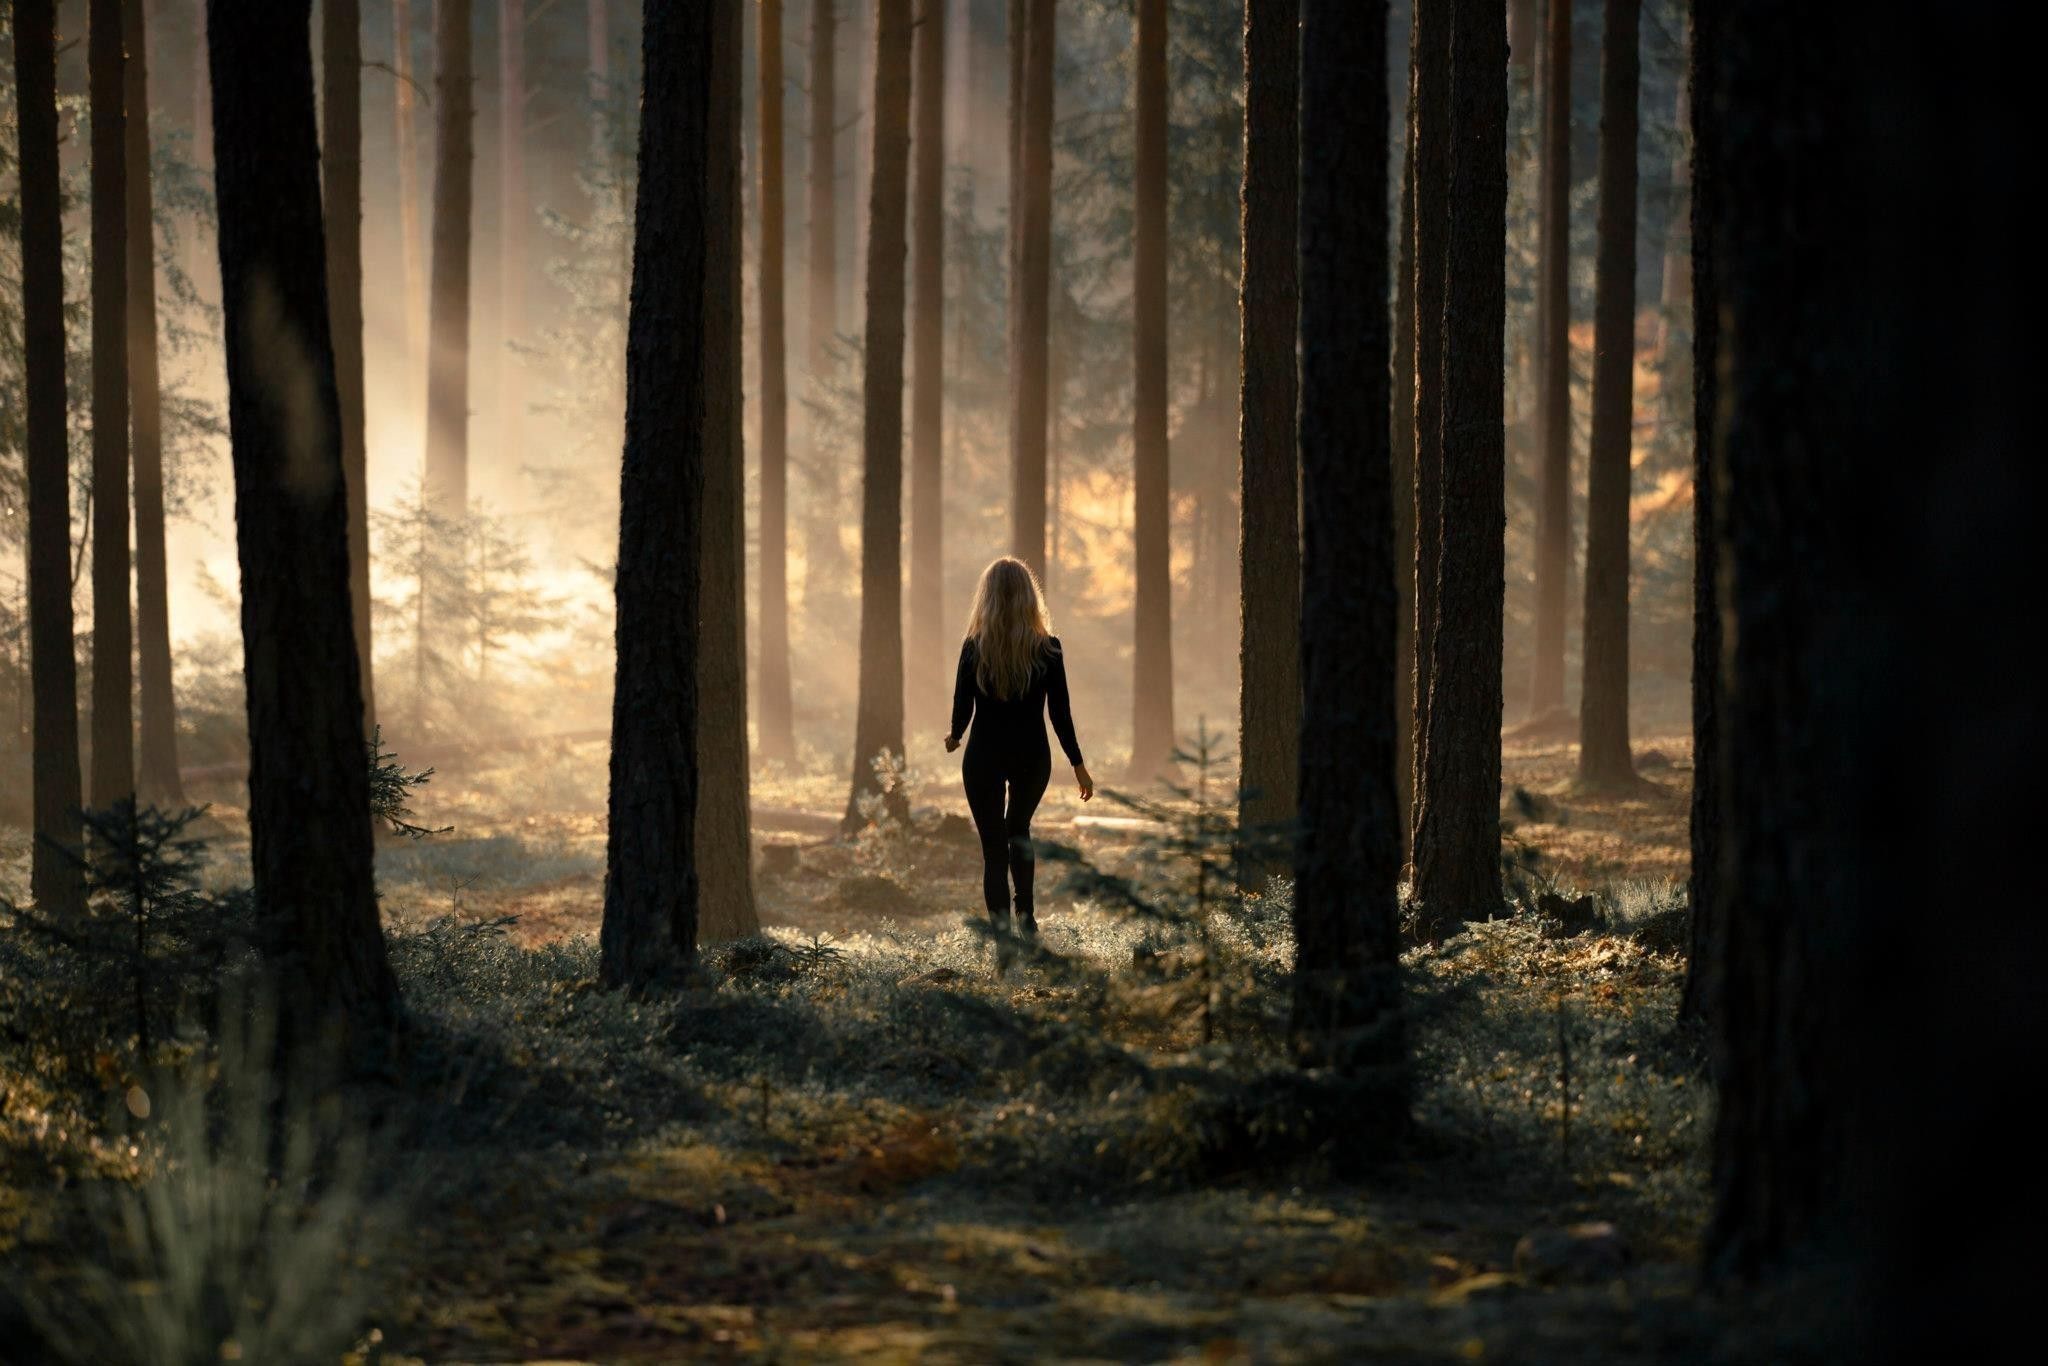 Anime Girl In Forest Wallpapers